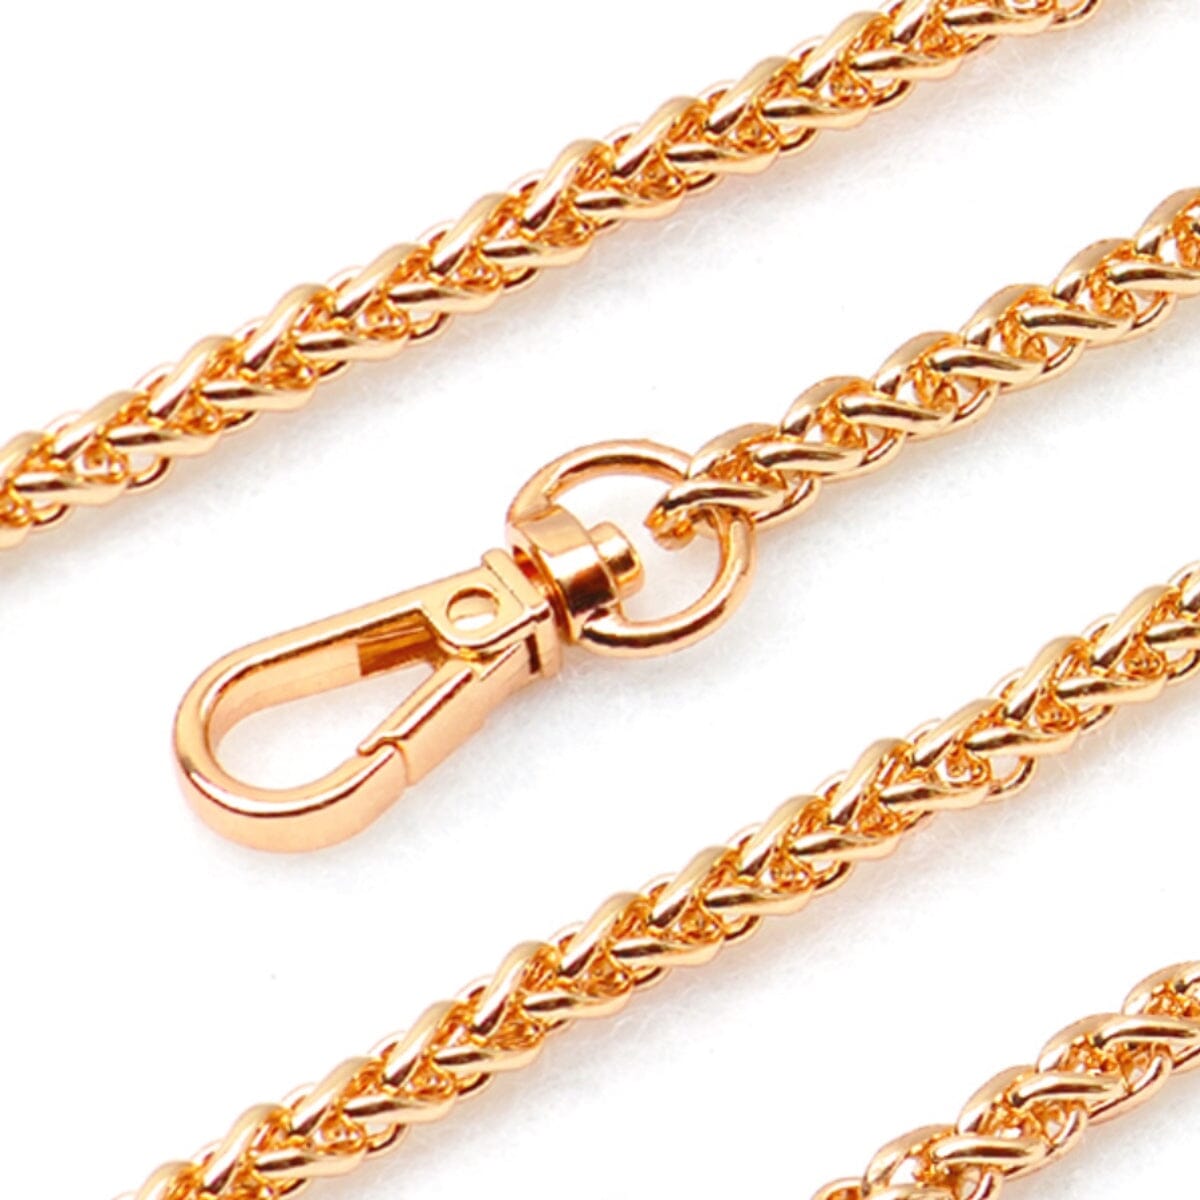 5mm plait weave metal chain Bags Accessories LOVEFREYA 35cm Gold 